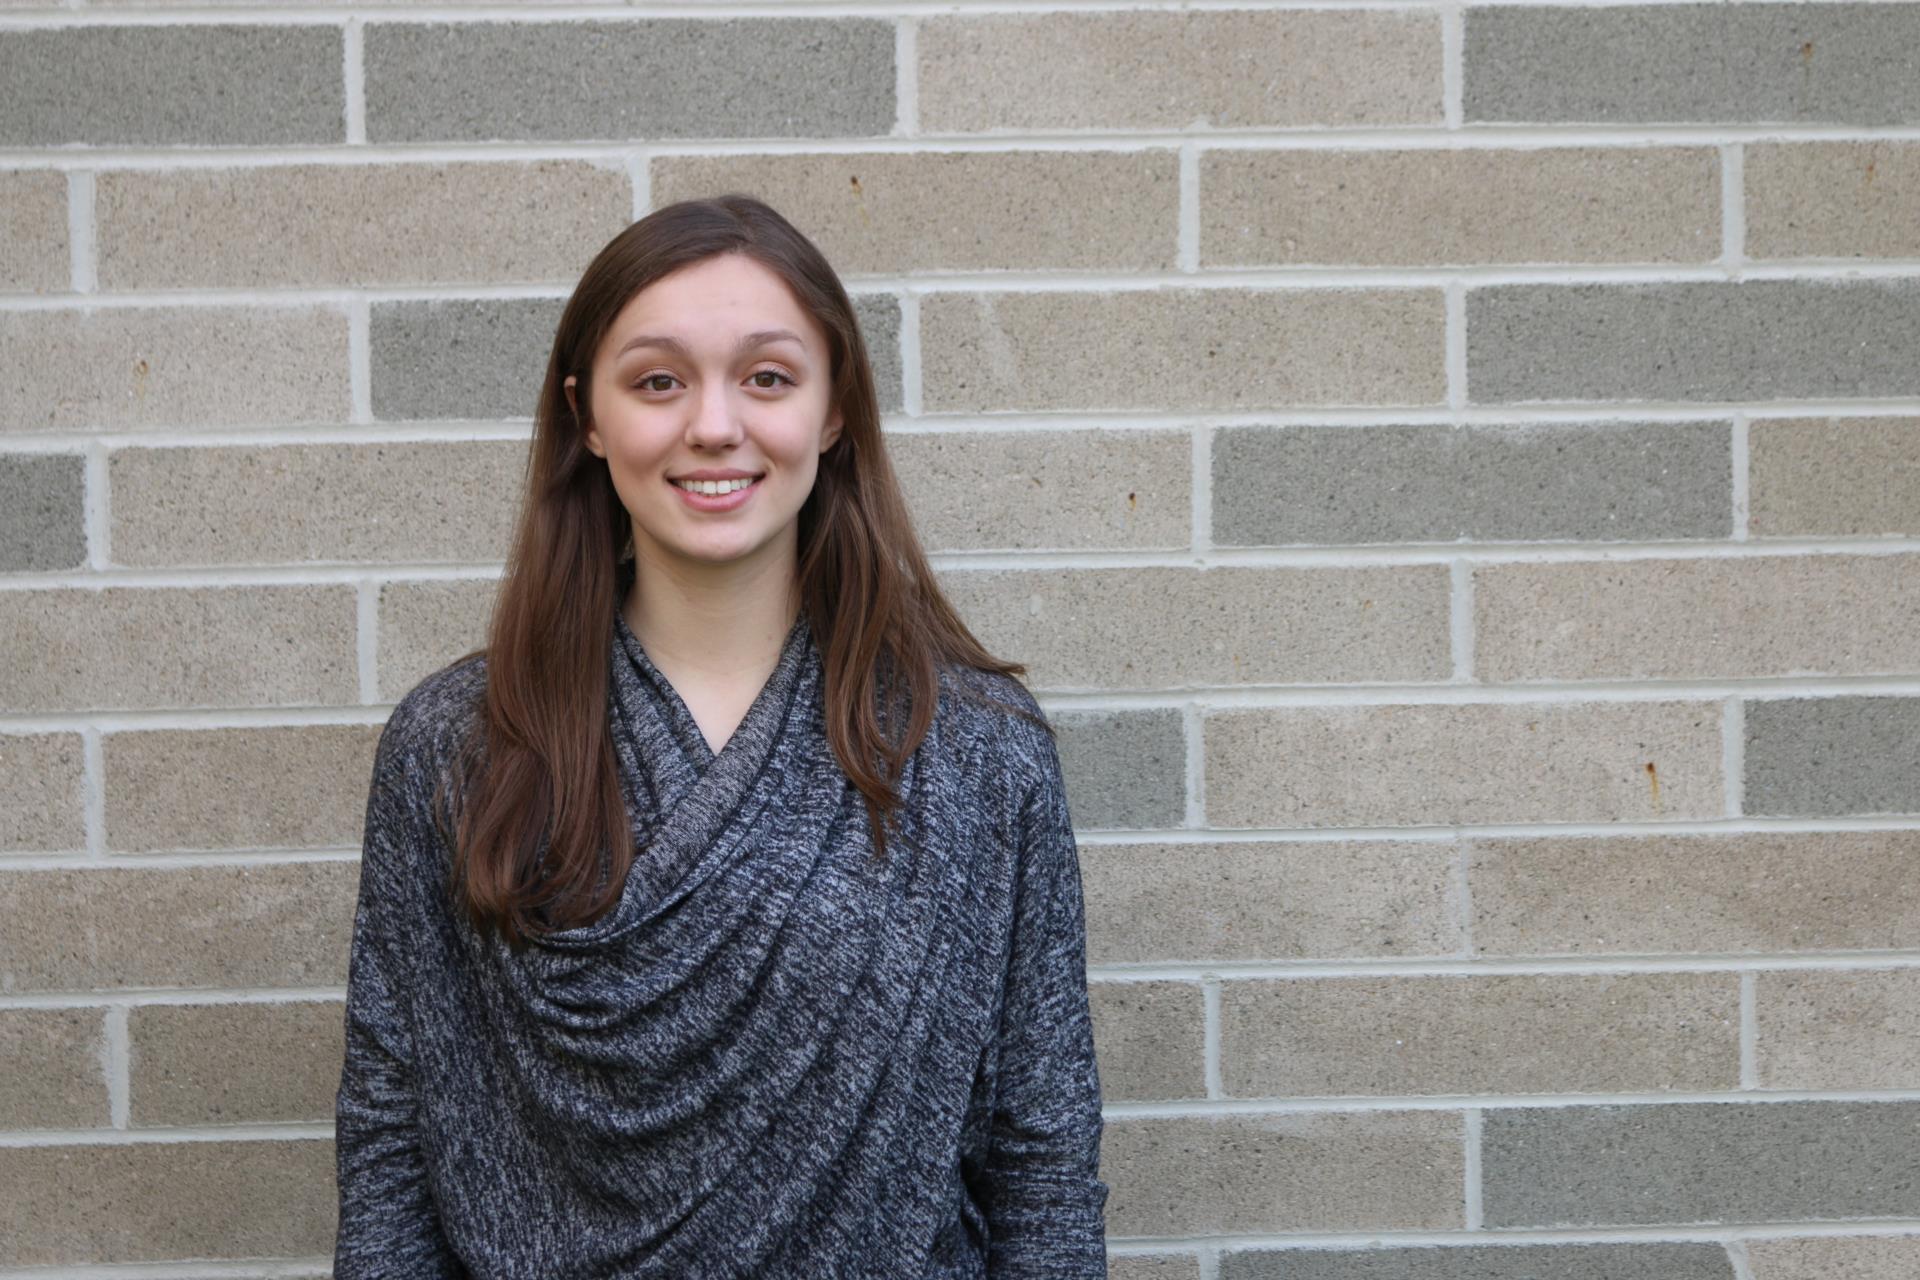 Senior Shannon Benner has been named the building winner of the Good Citizen essay contest on behalf of the Pickaway Plains Chapter of the Daughters of American Revolution (D.A.R.).